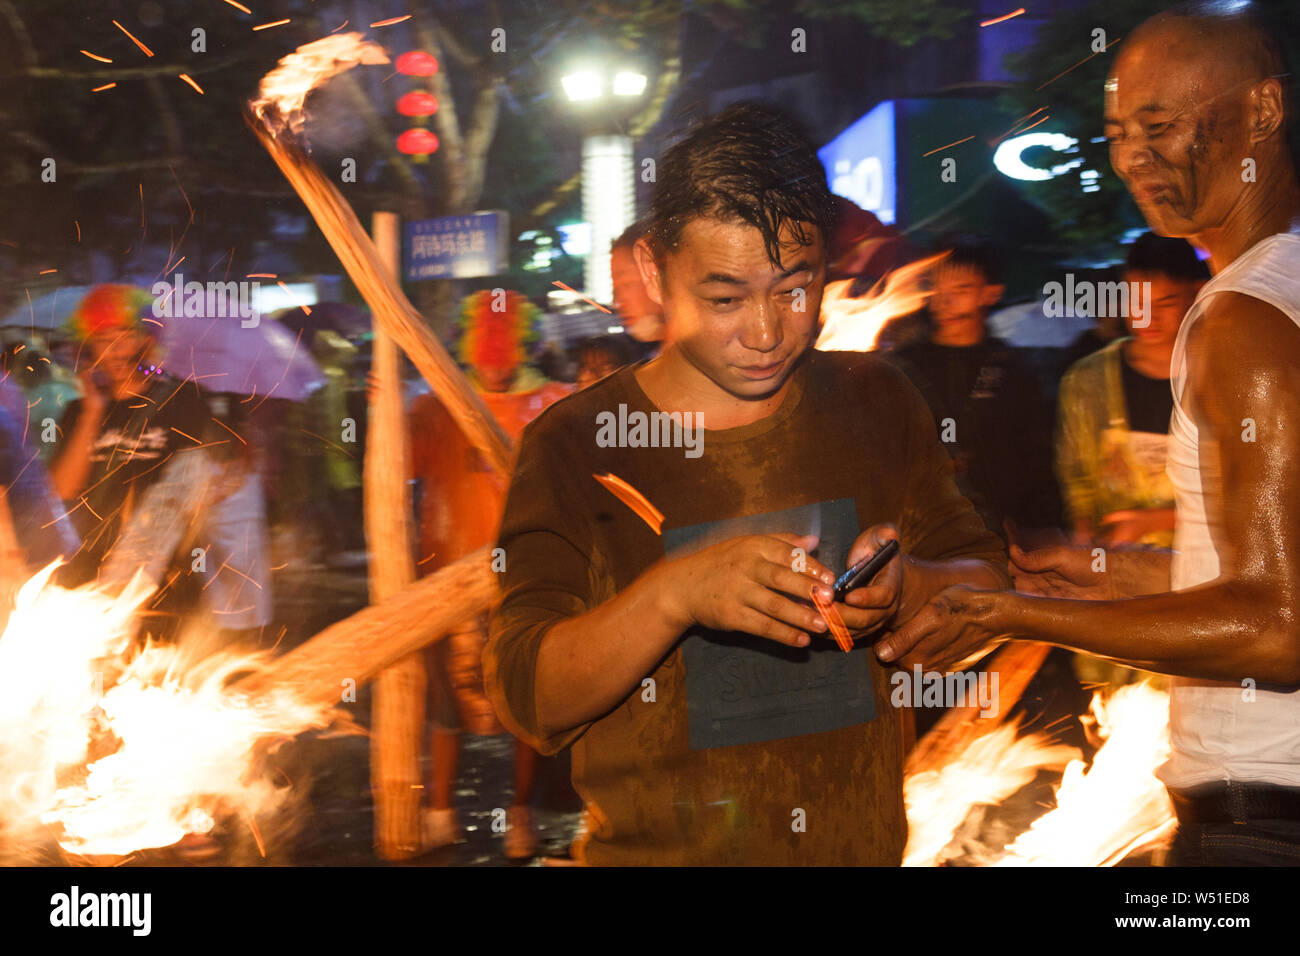 Celebrations of the torch festival in Yunnan province, China Stock Photo